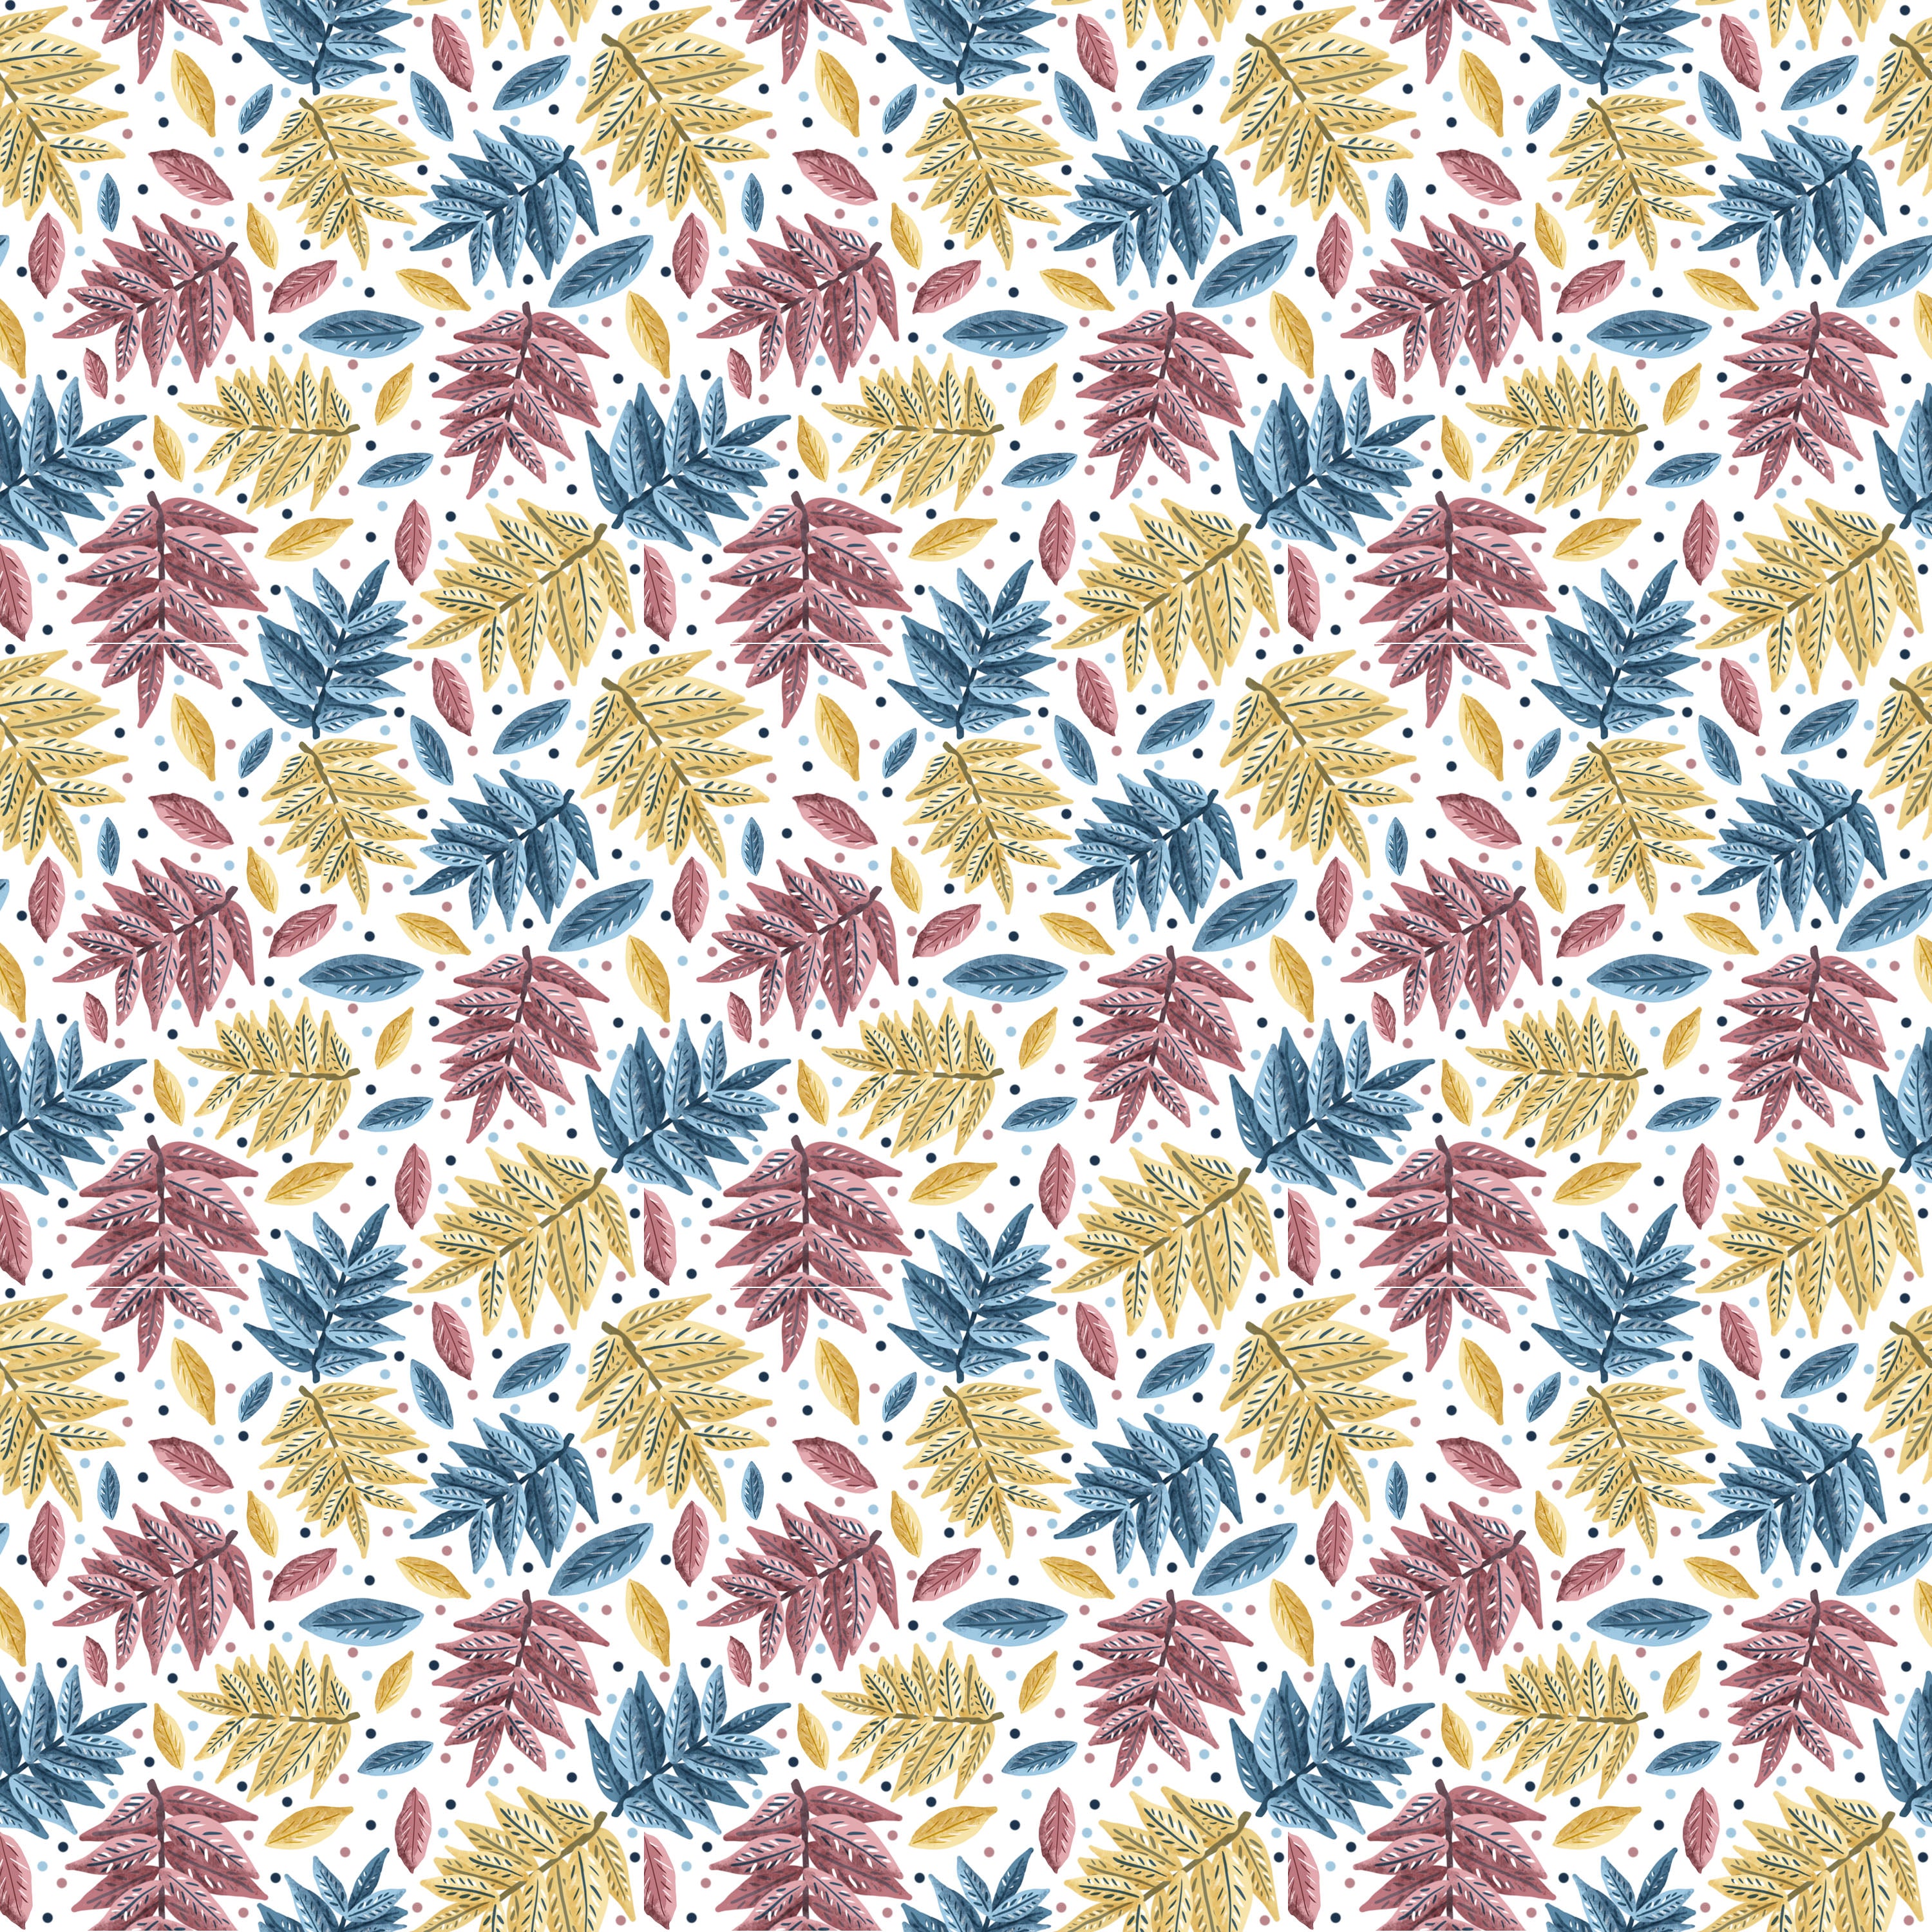 red squirrel secondary pattern design